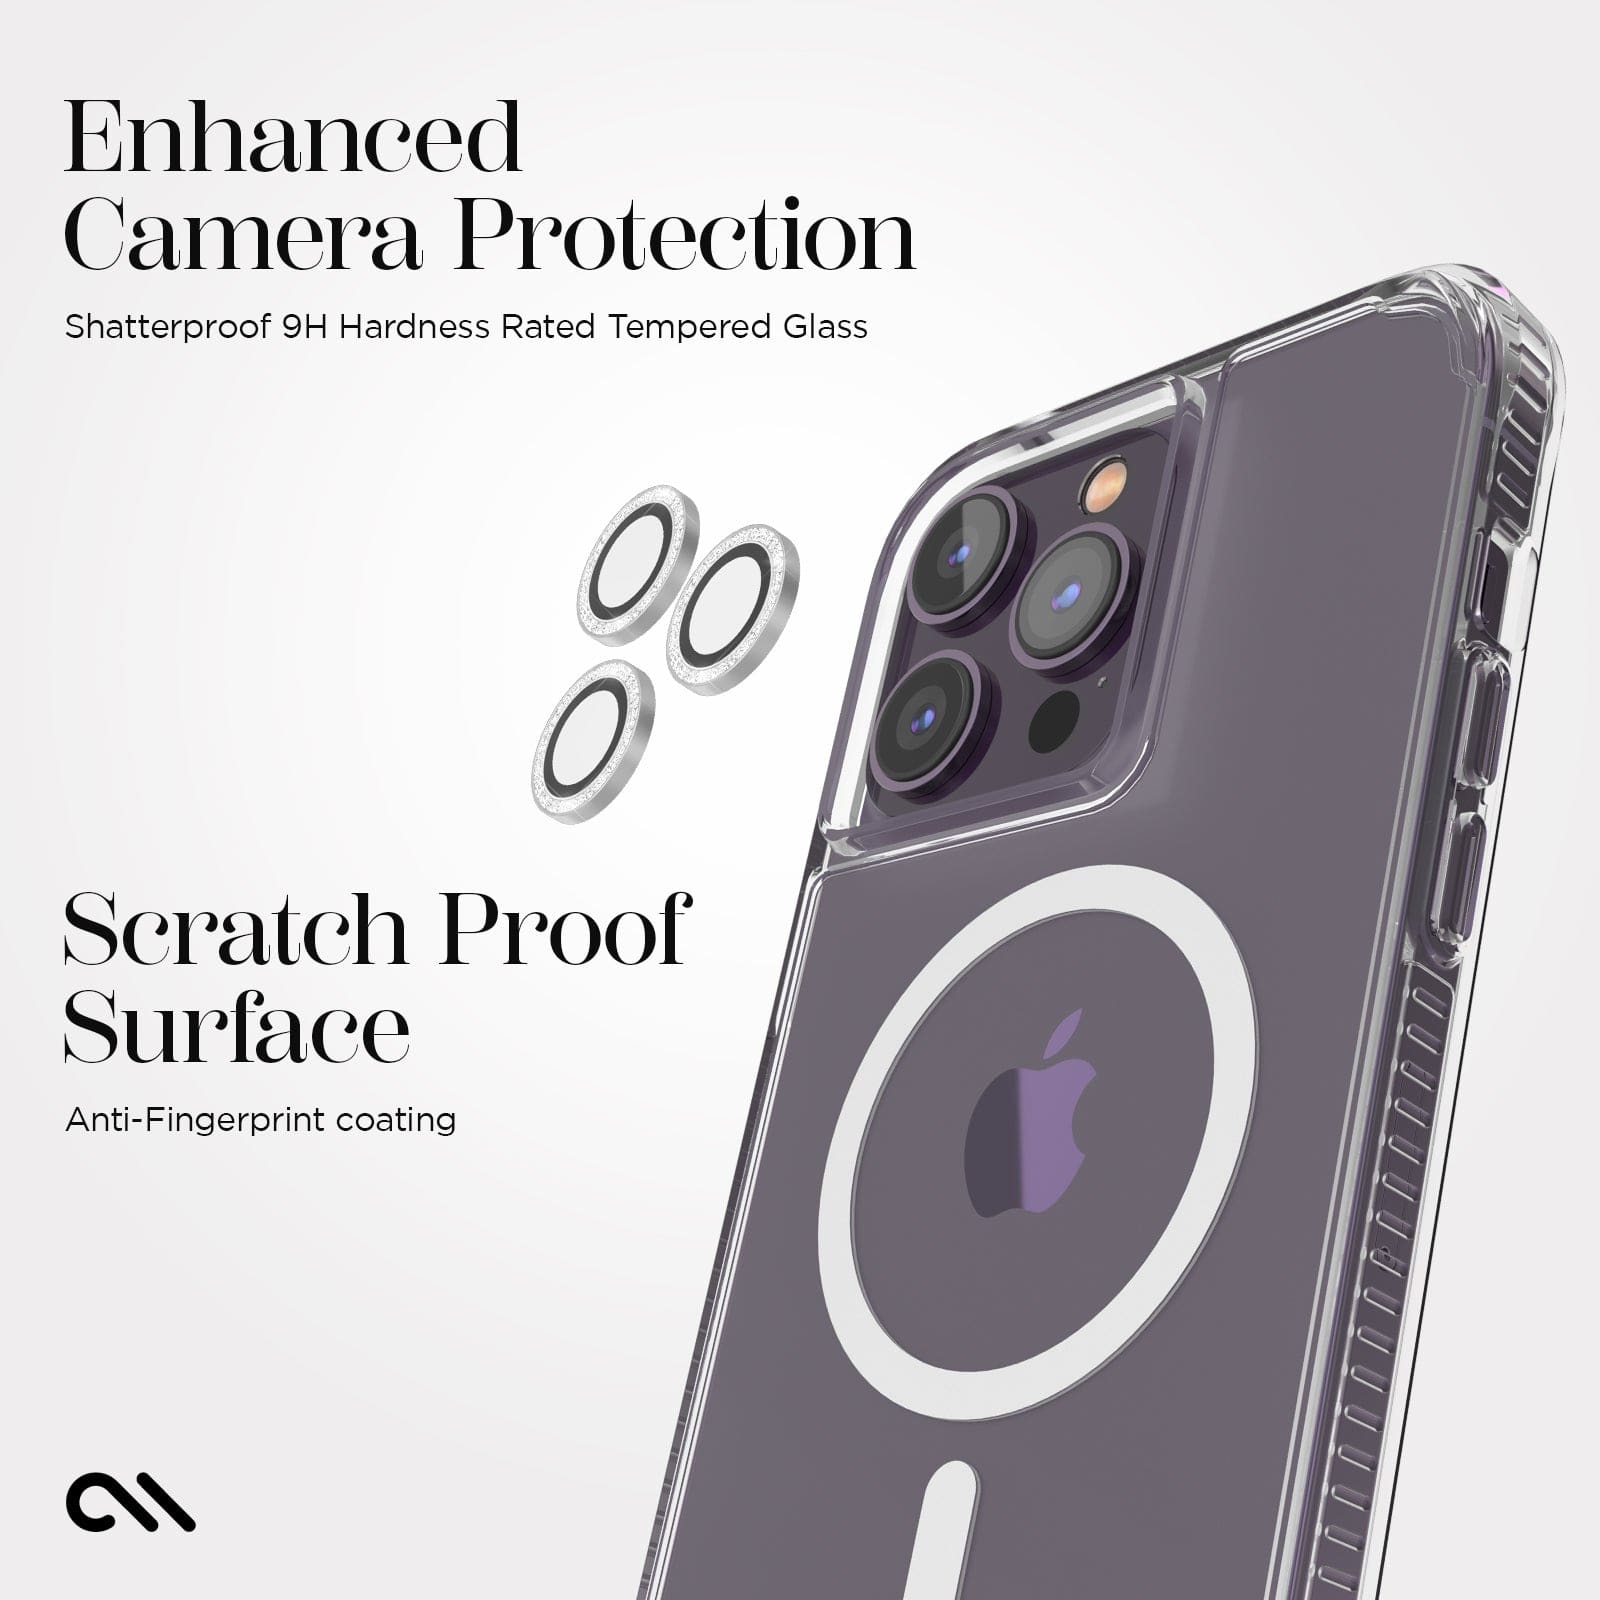 Enhanced camera protection. Shatterproof 9H hardness rated tempered glass. Scratchproof surface and anti-fingerprint coating